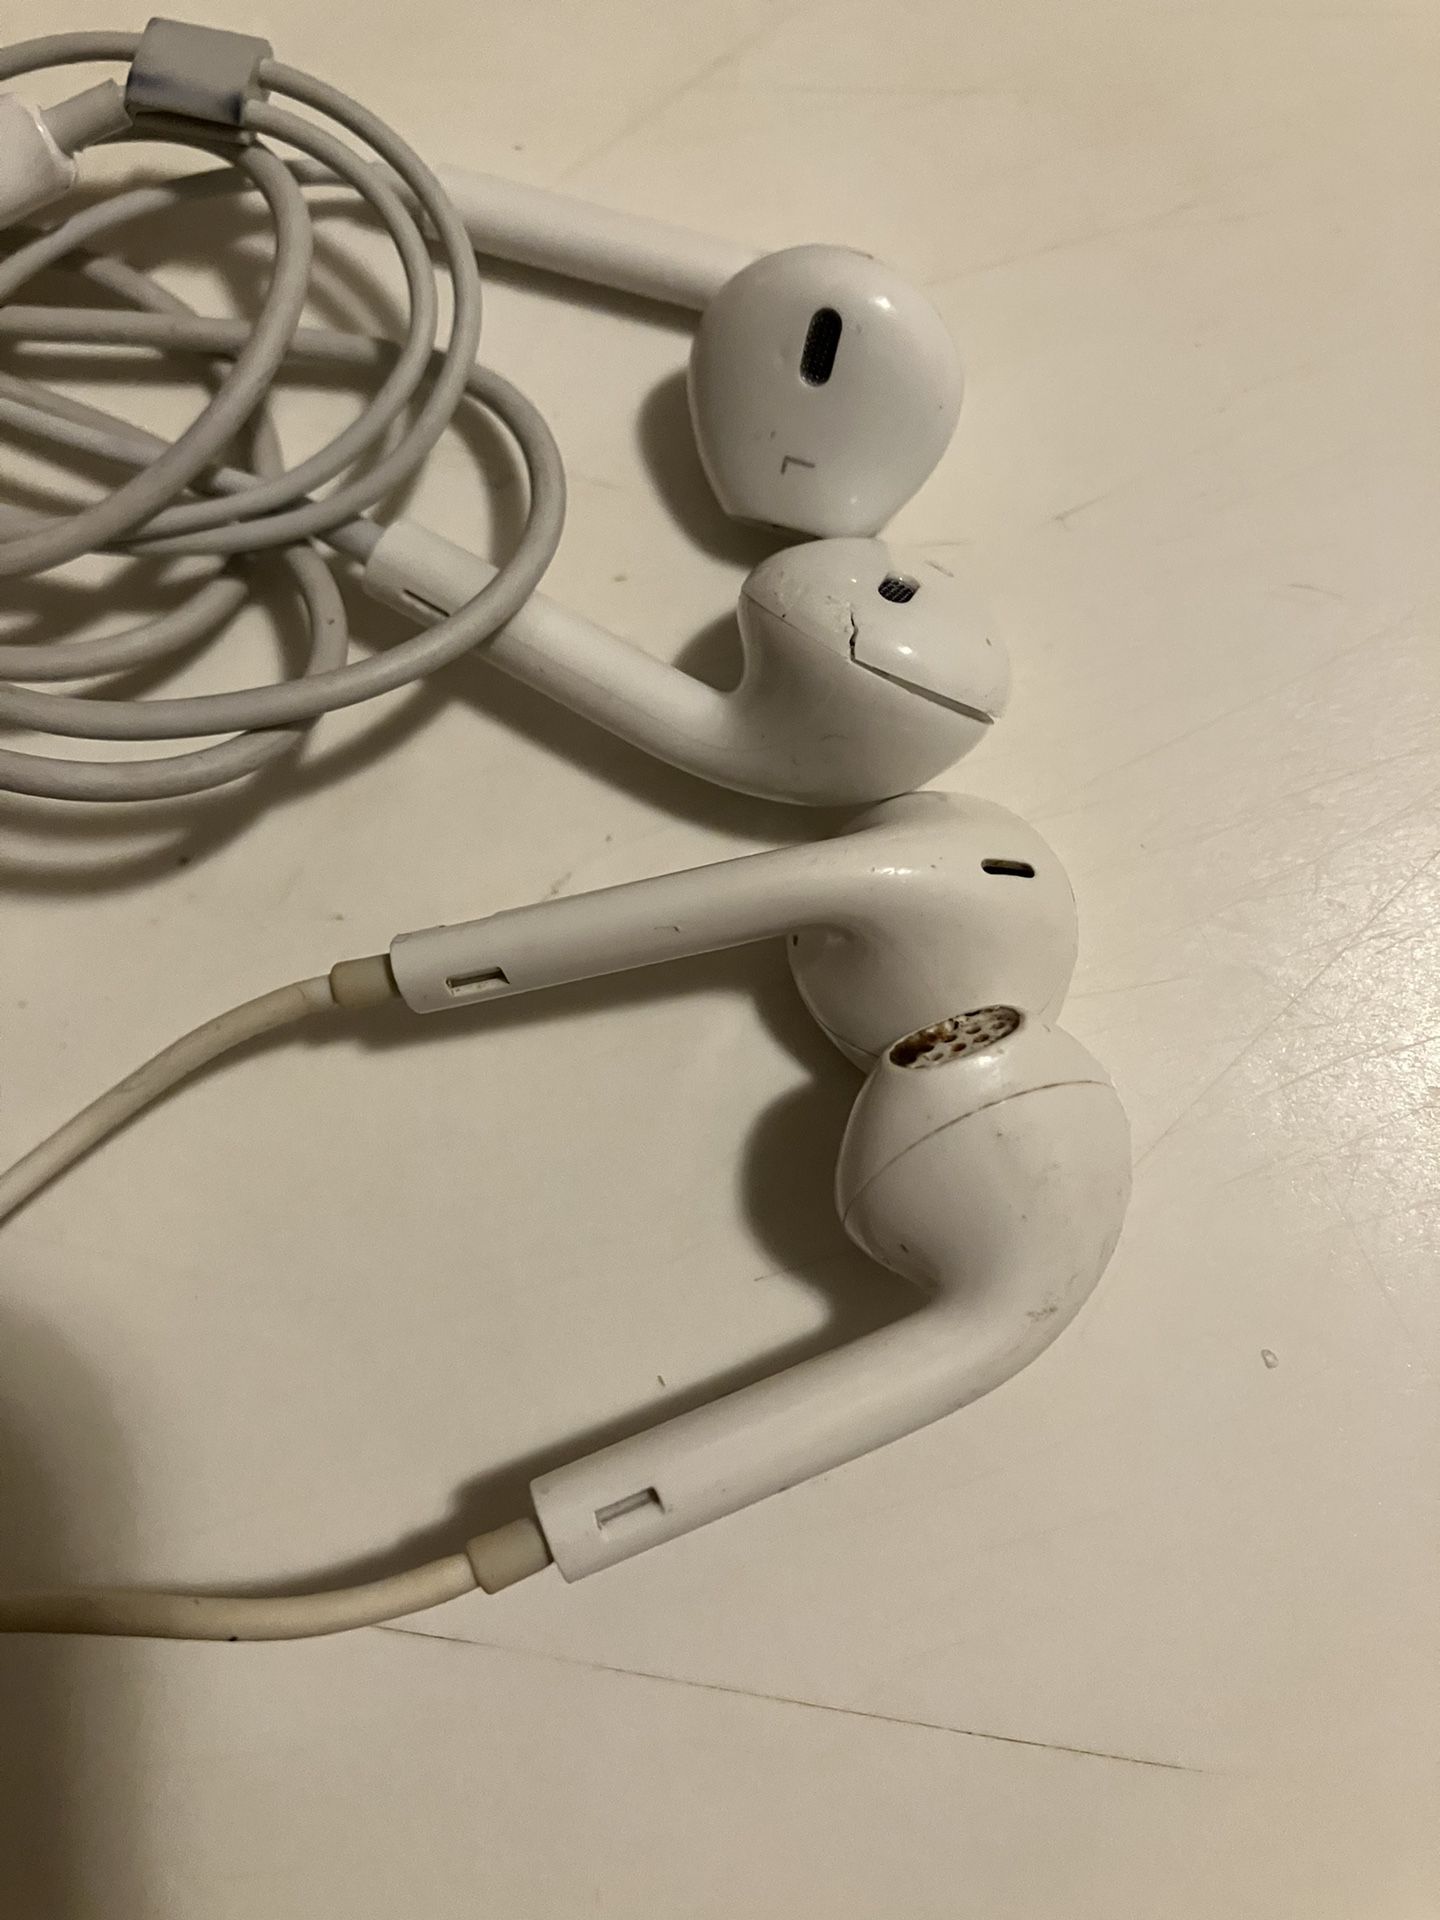 2 Pairs Of Apple Headphones With A Phone Jack 